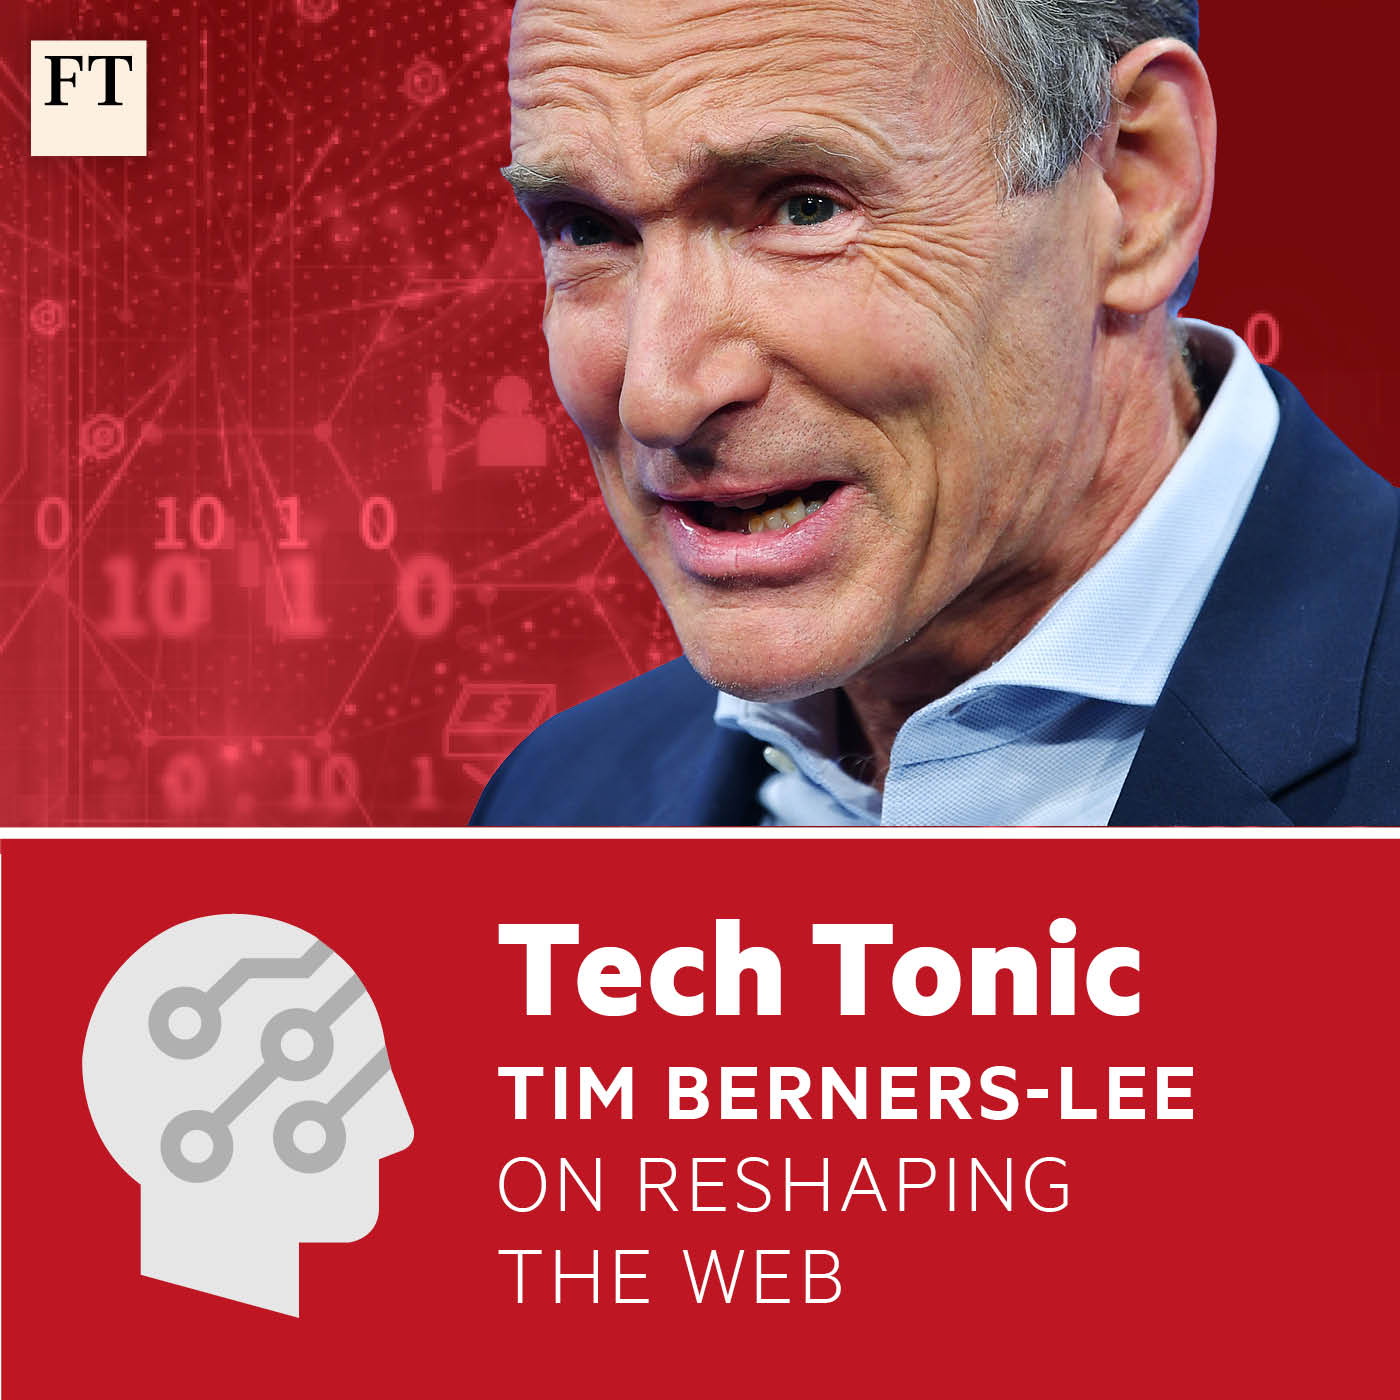 Tim Berners-Lee on reshaping the web